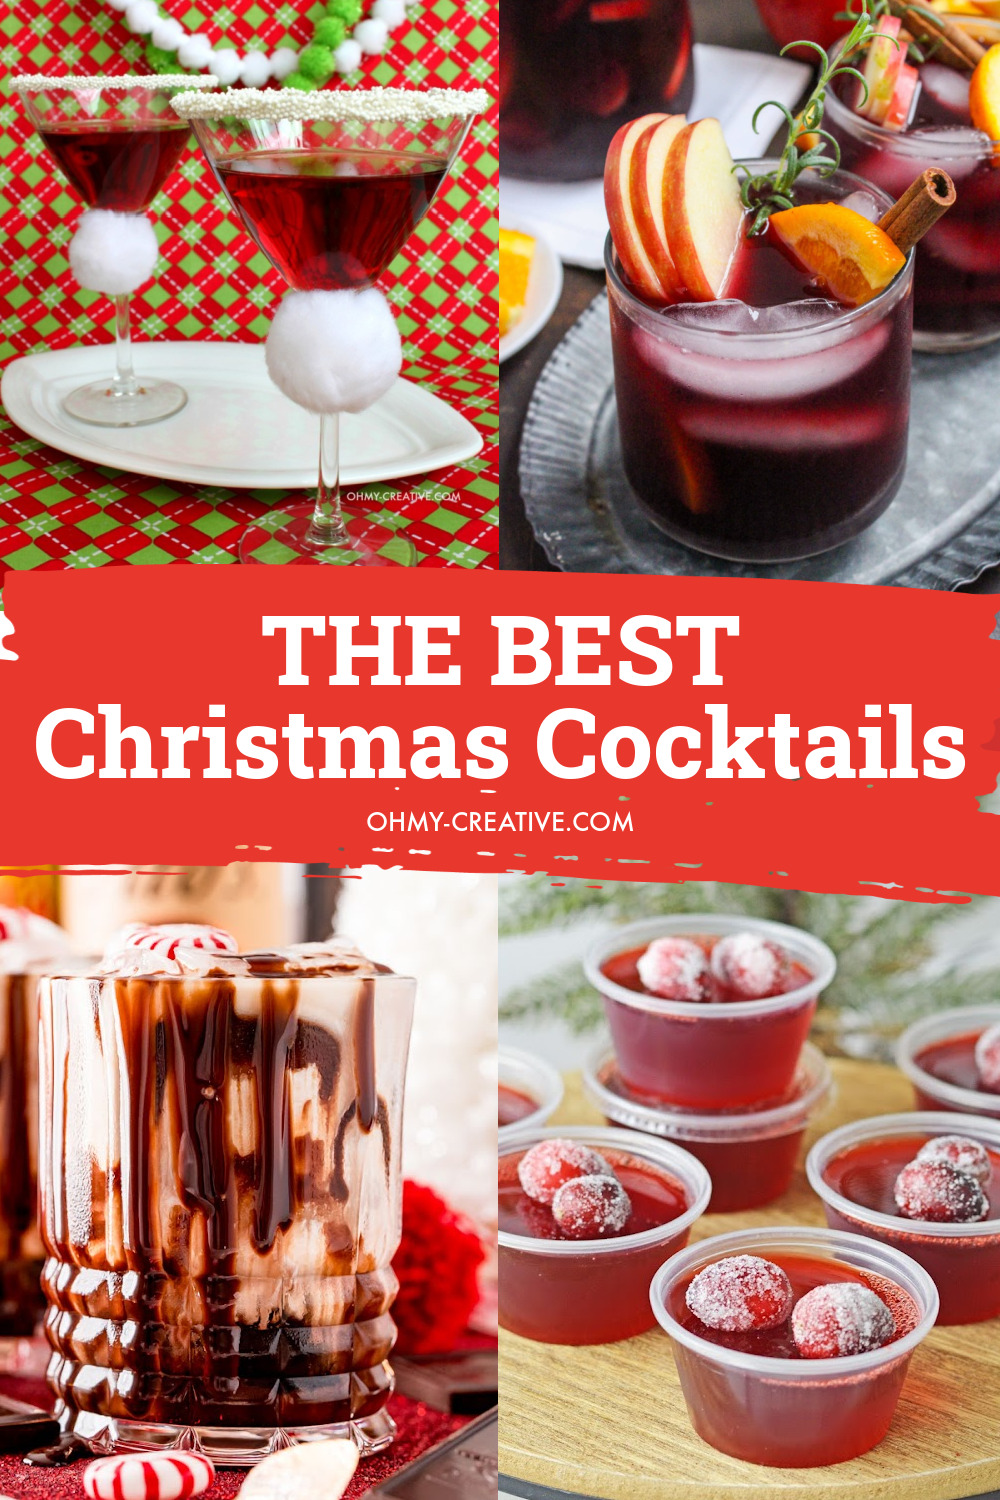 A collage of Christmas Cocktails including a Santa hat martini, cranberry jello shots, Christmas sangria, and peppermint cocktails.